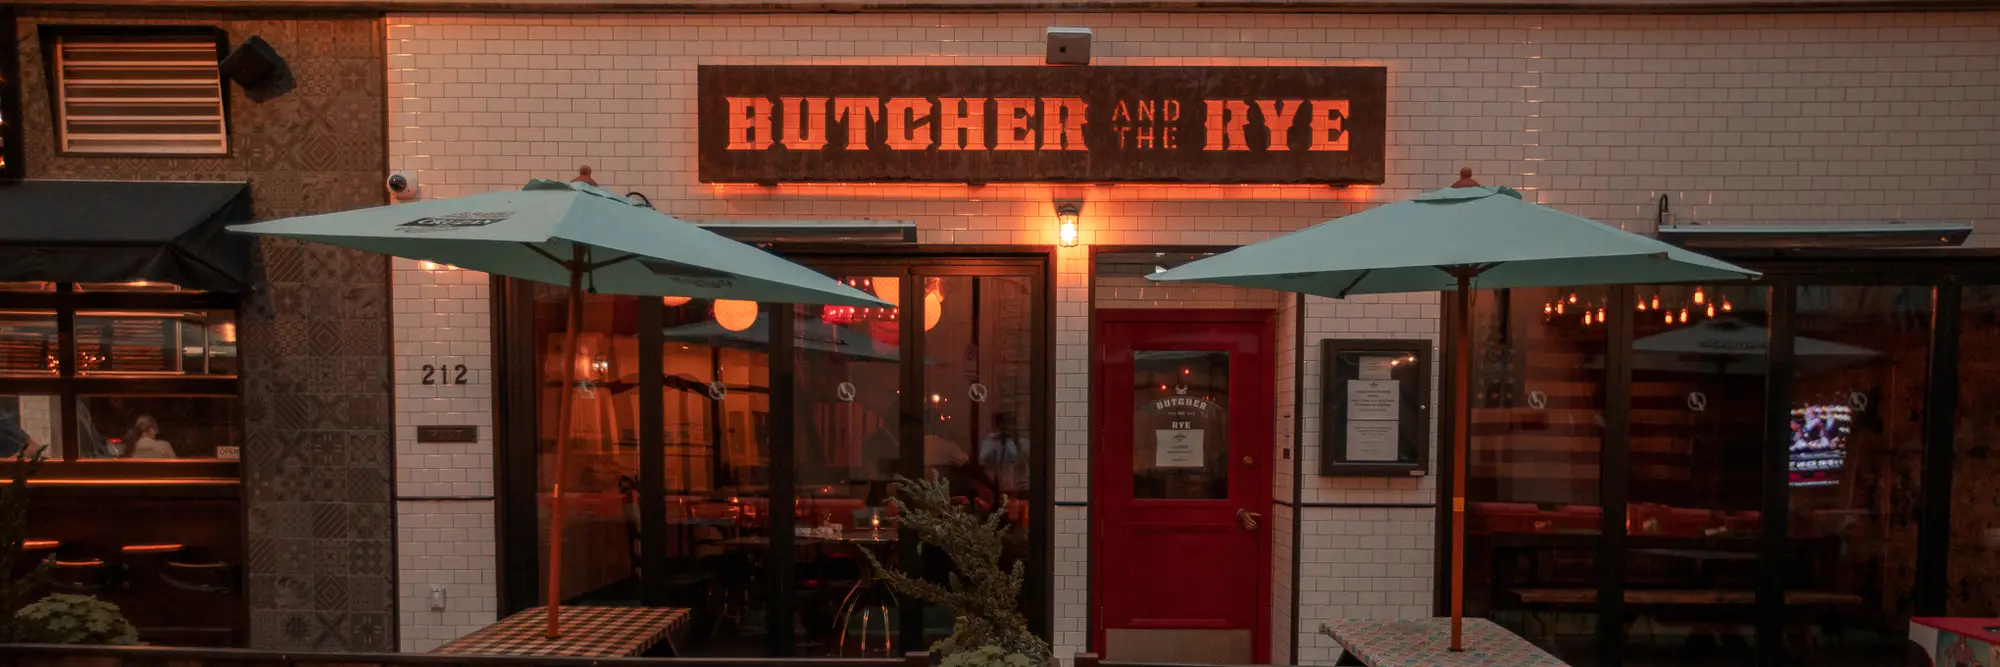 Photo of the downtown restaurant, Butcher and the Rye.